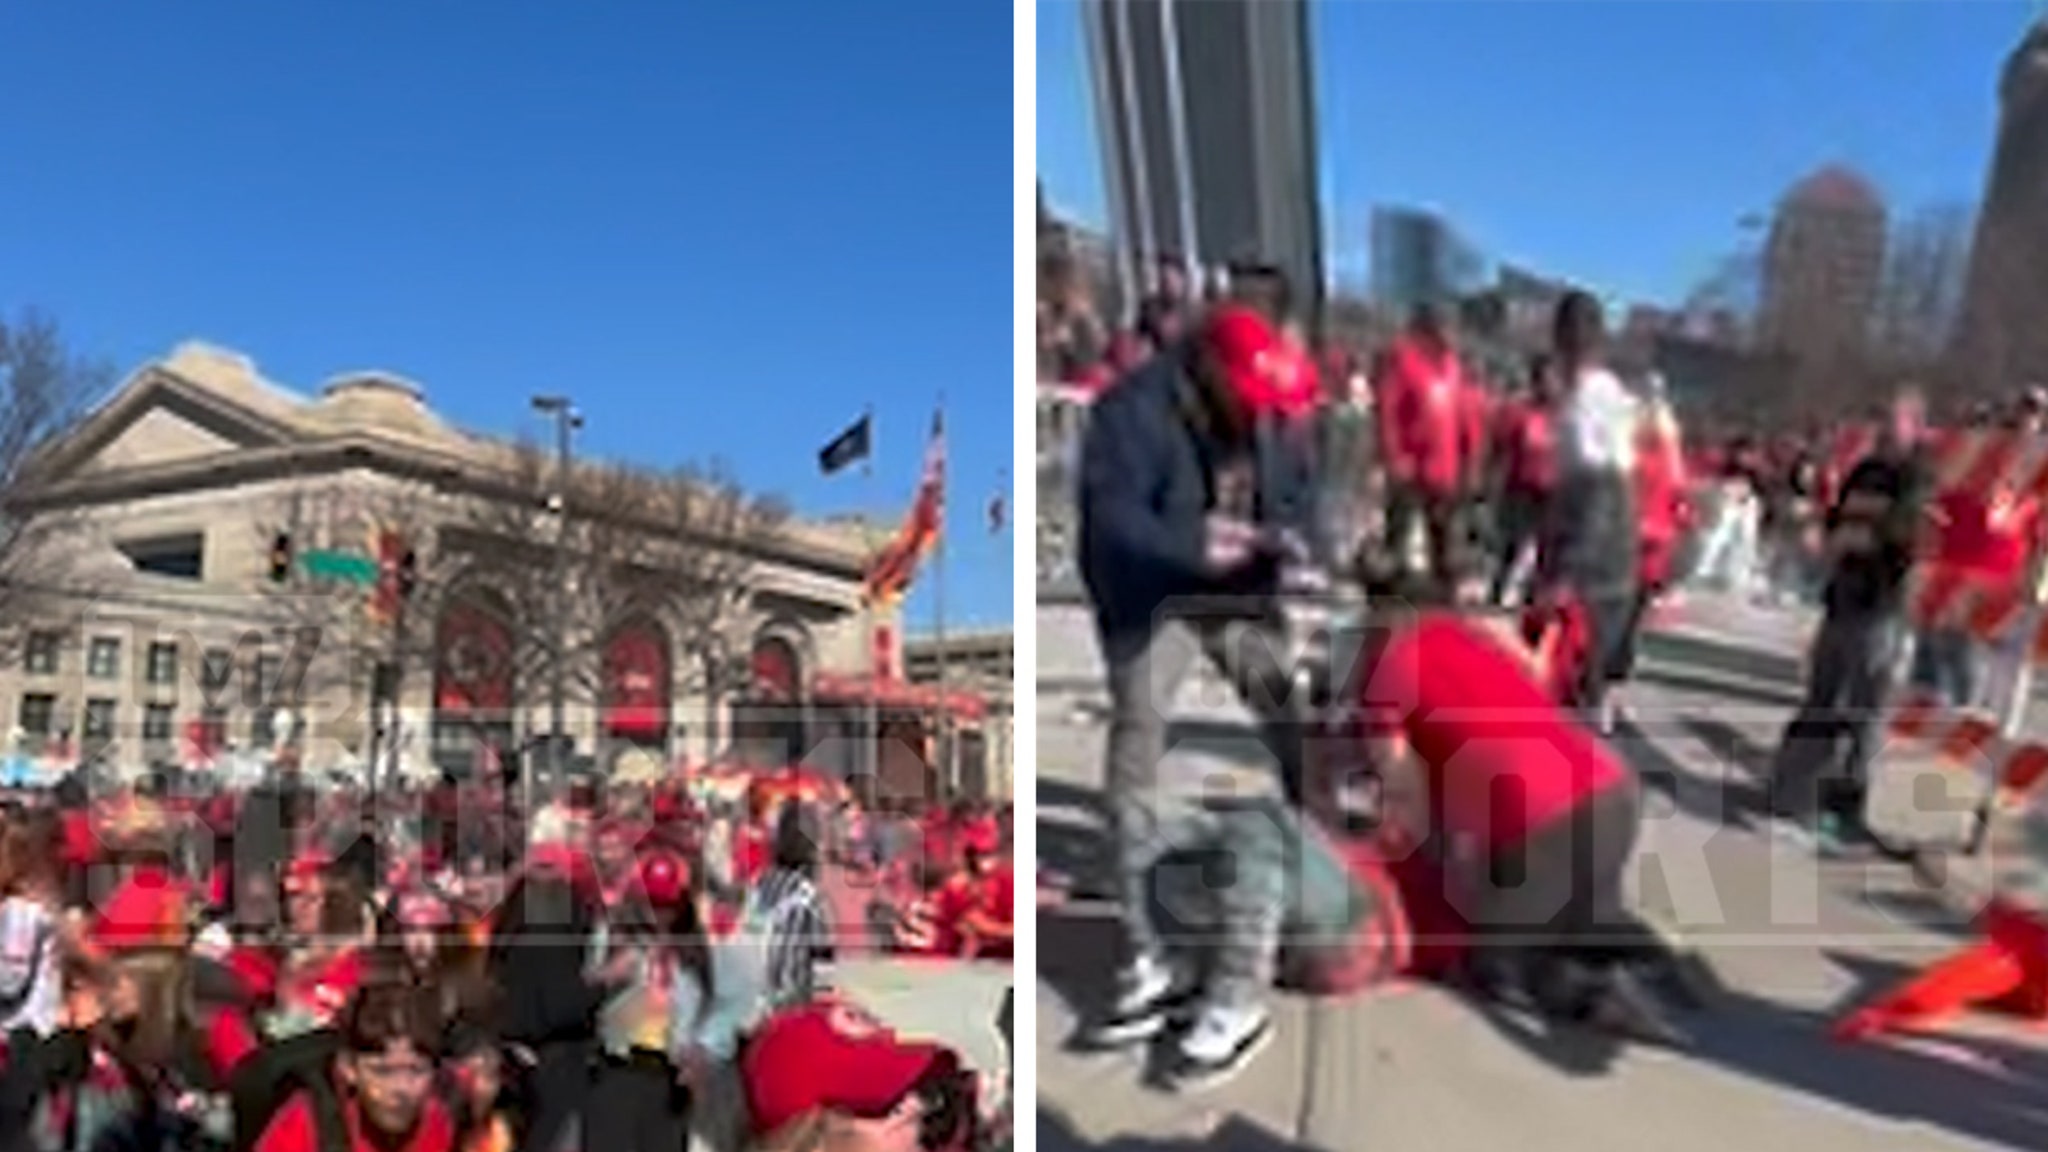 Video Of Moment Shots Rang Out at Chiefs Rally, AR-Style Rifle Seen